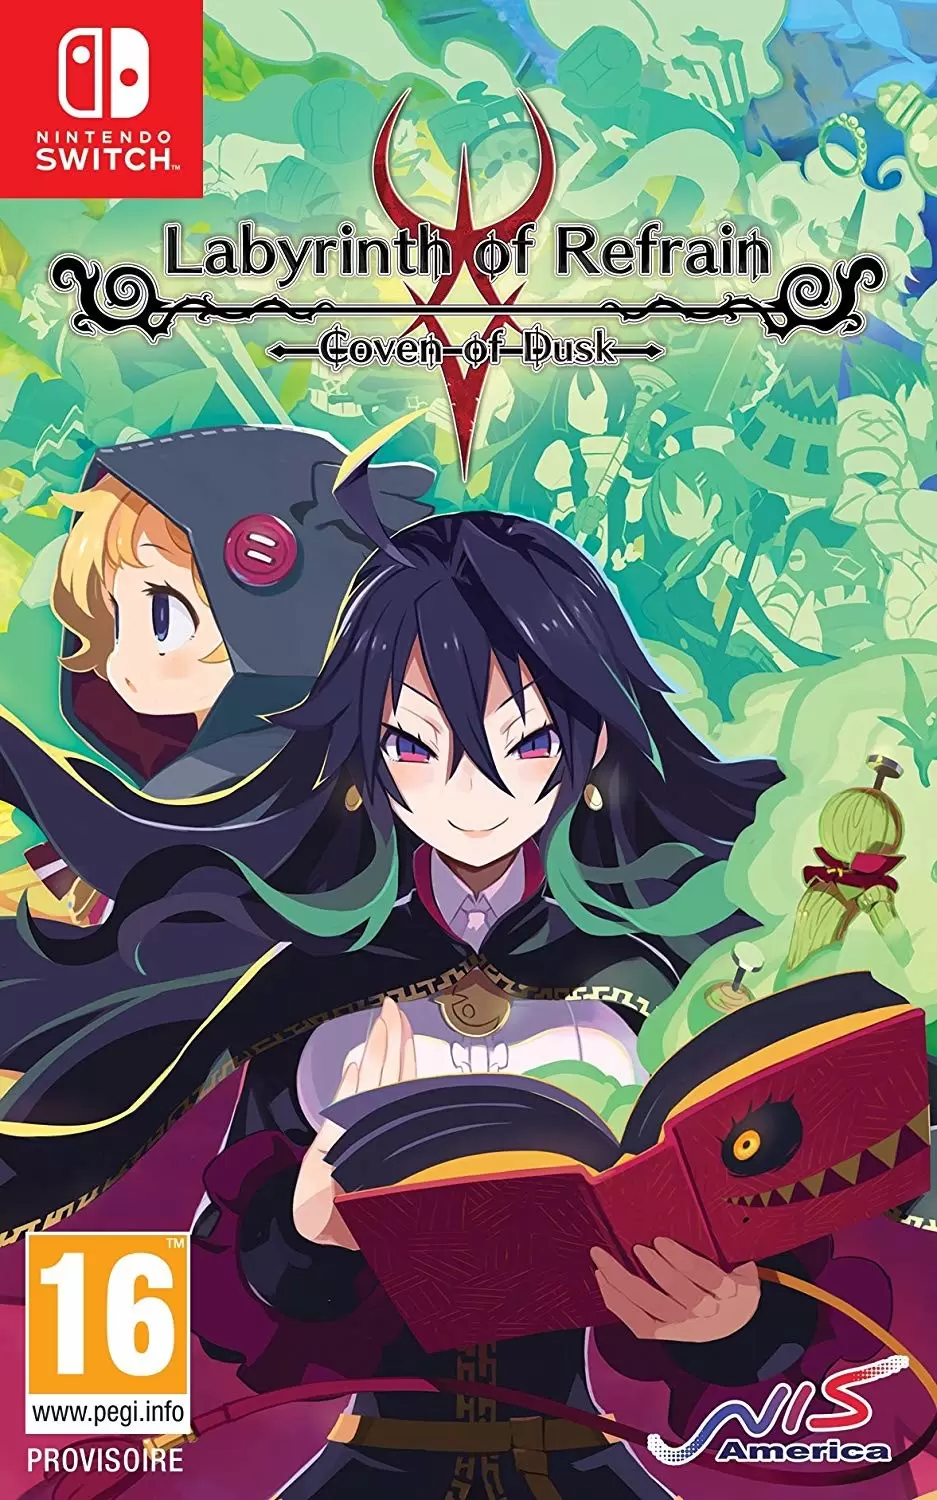 Jeux Nintendo Switch - Labyrinth of Refrain - Coven of Dusk